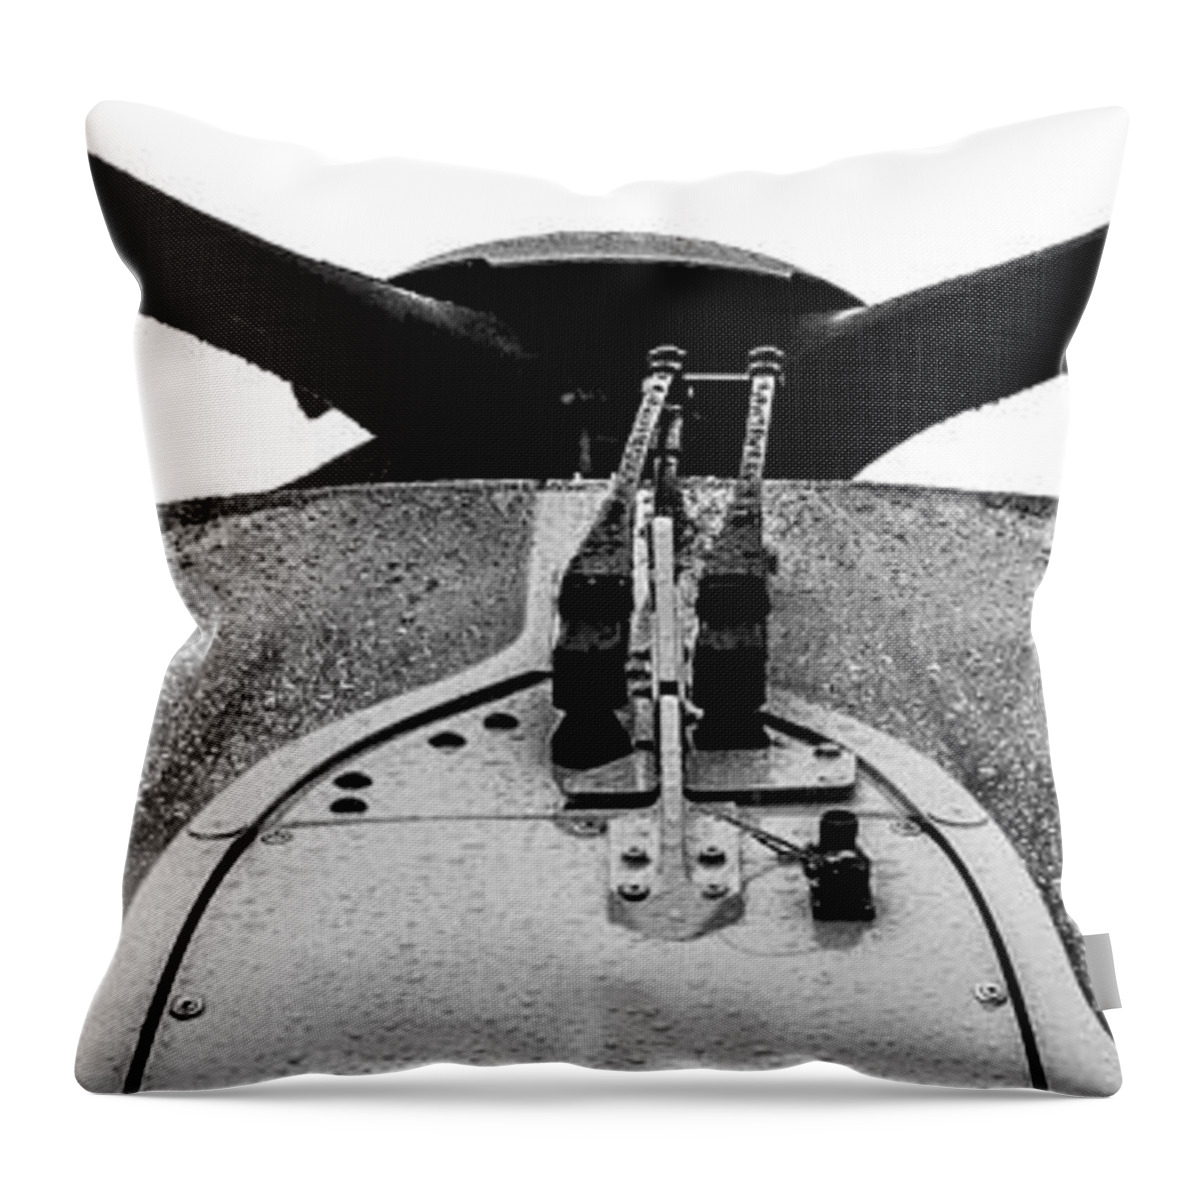 Bill Kesler Photography Throw Pillow featuring the photograph Panorama Windshield by Bill Kesler